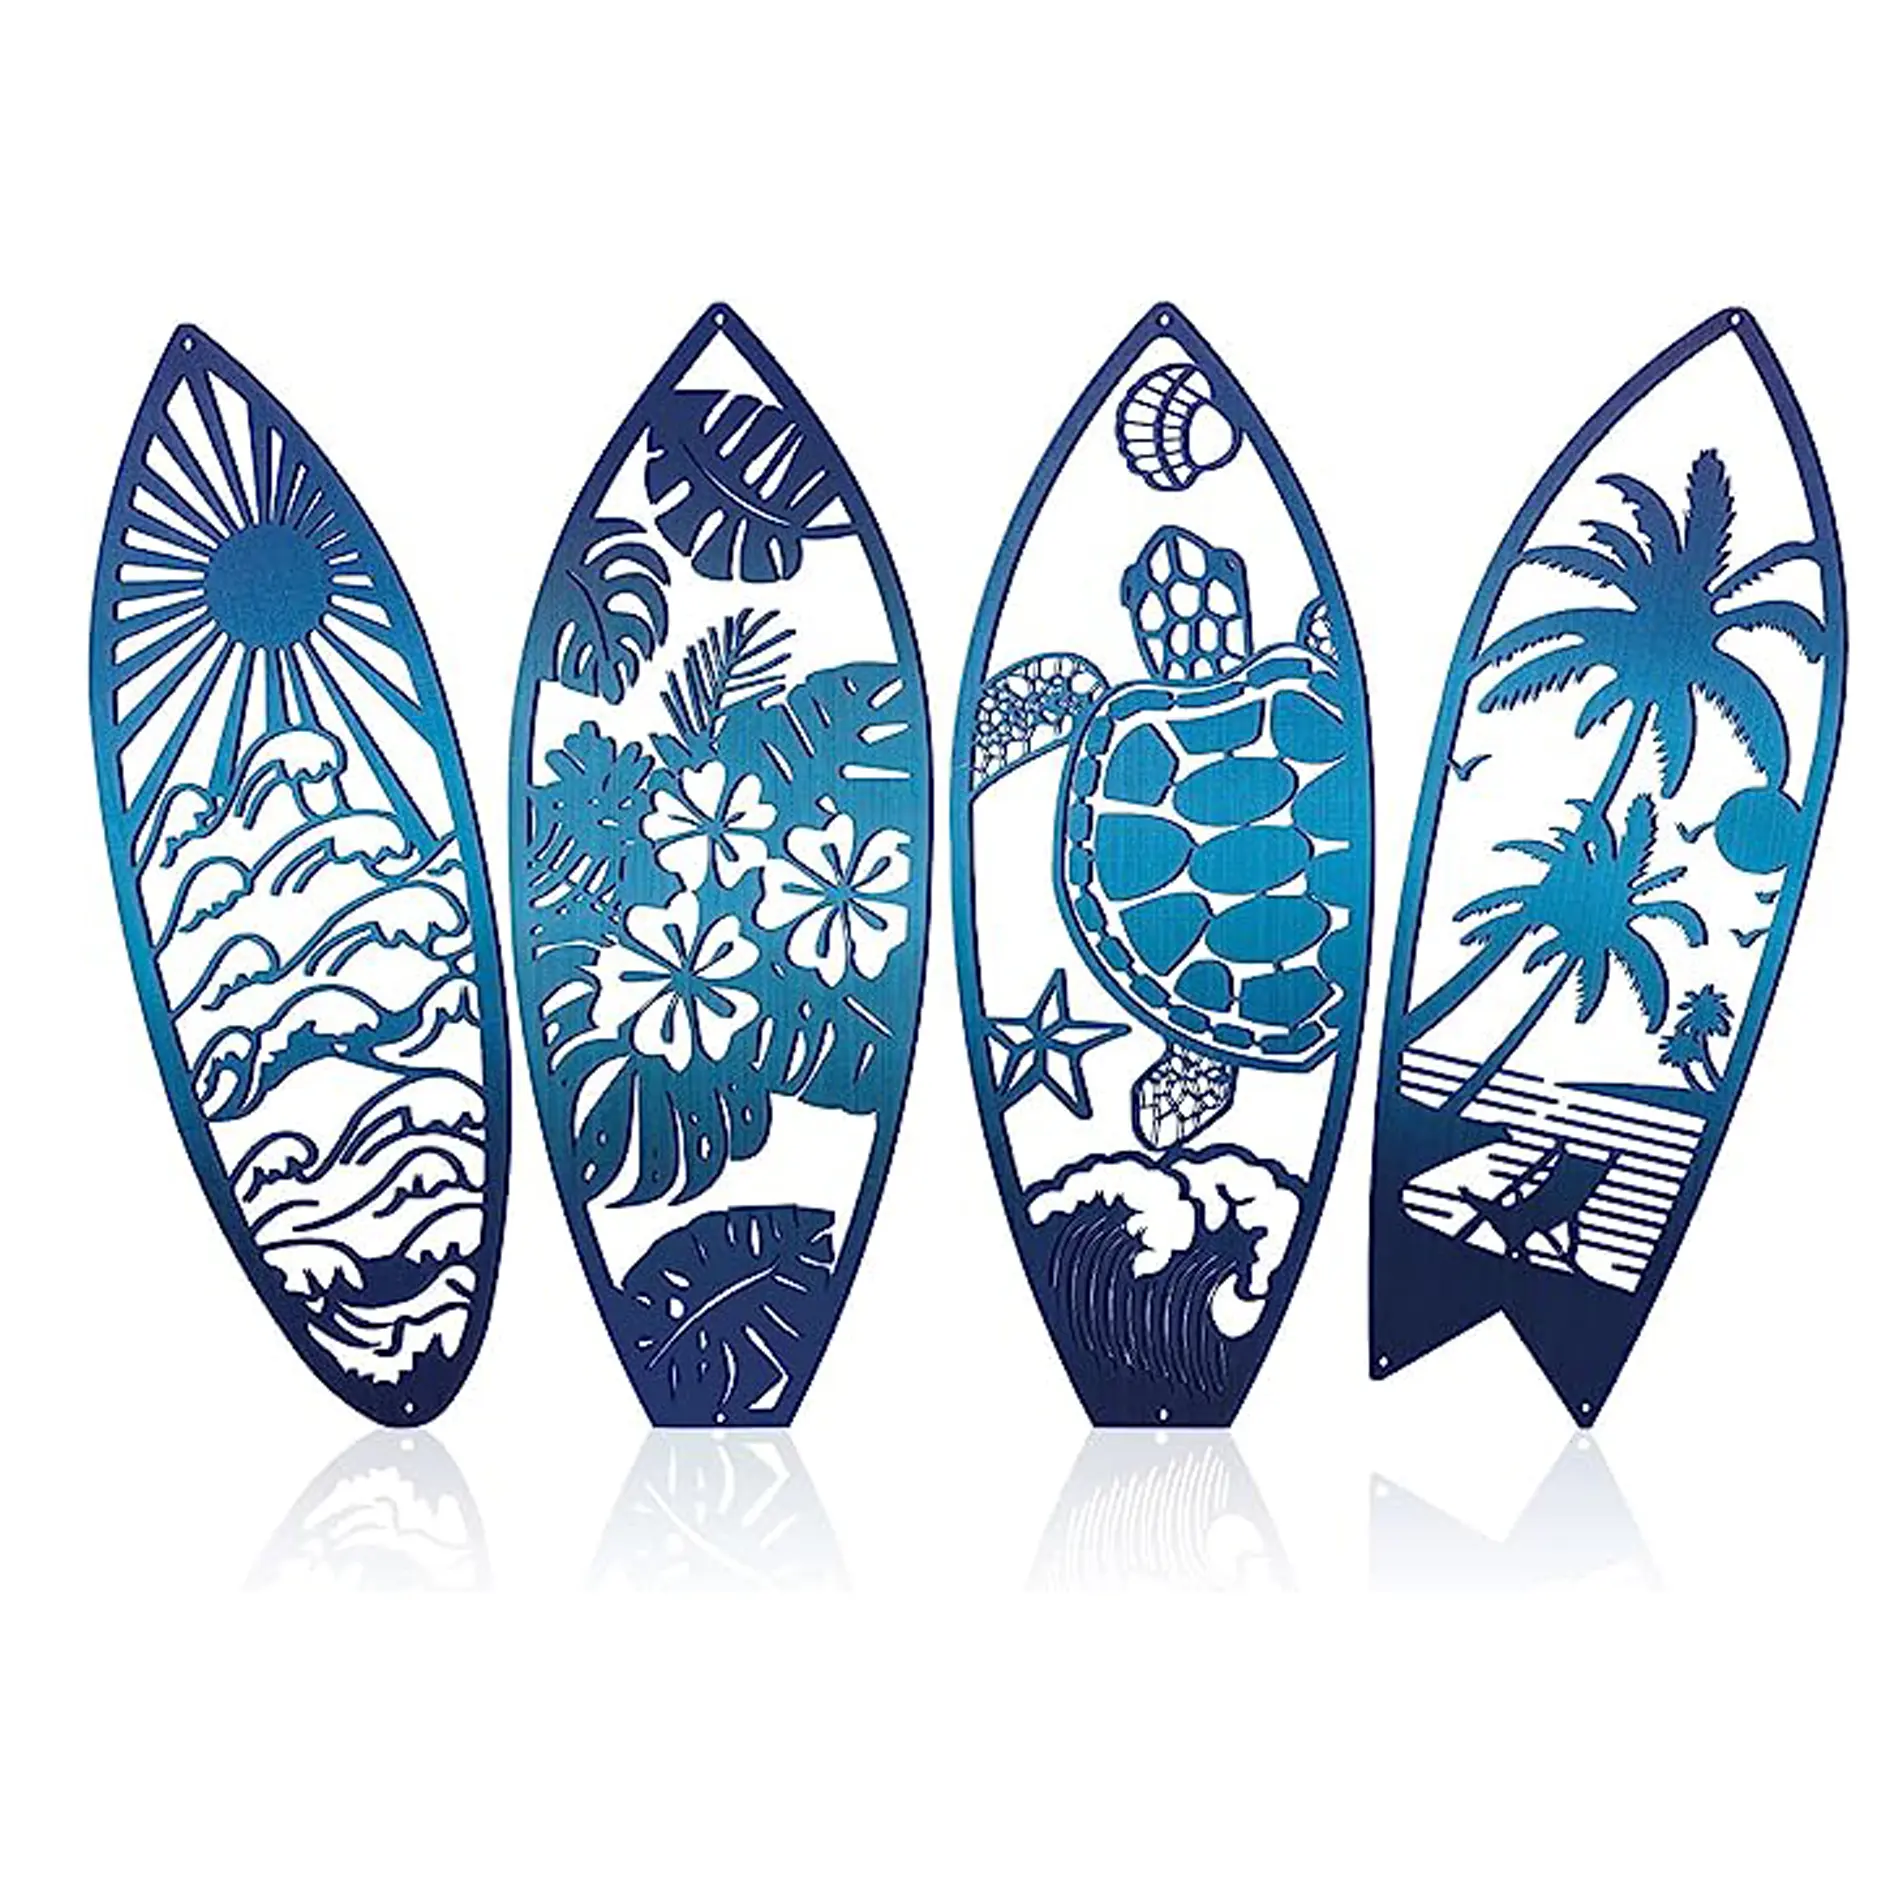 Metal Laser Cut Surf Board Wall Art Metal Wall Decor Office Decor Wall Decorations for Living Room Aesthetic Design